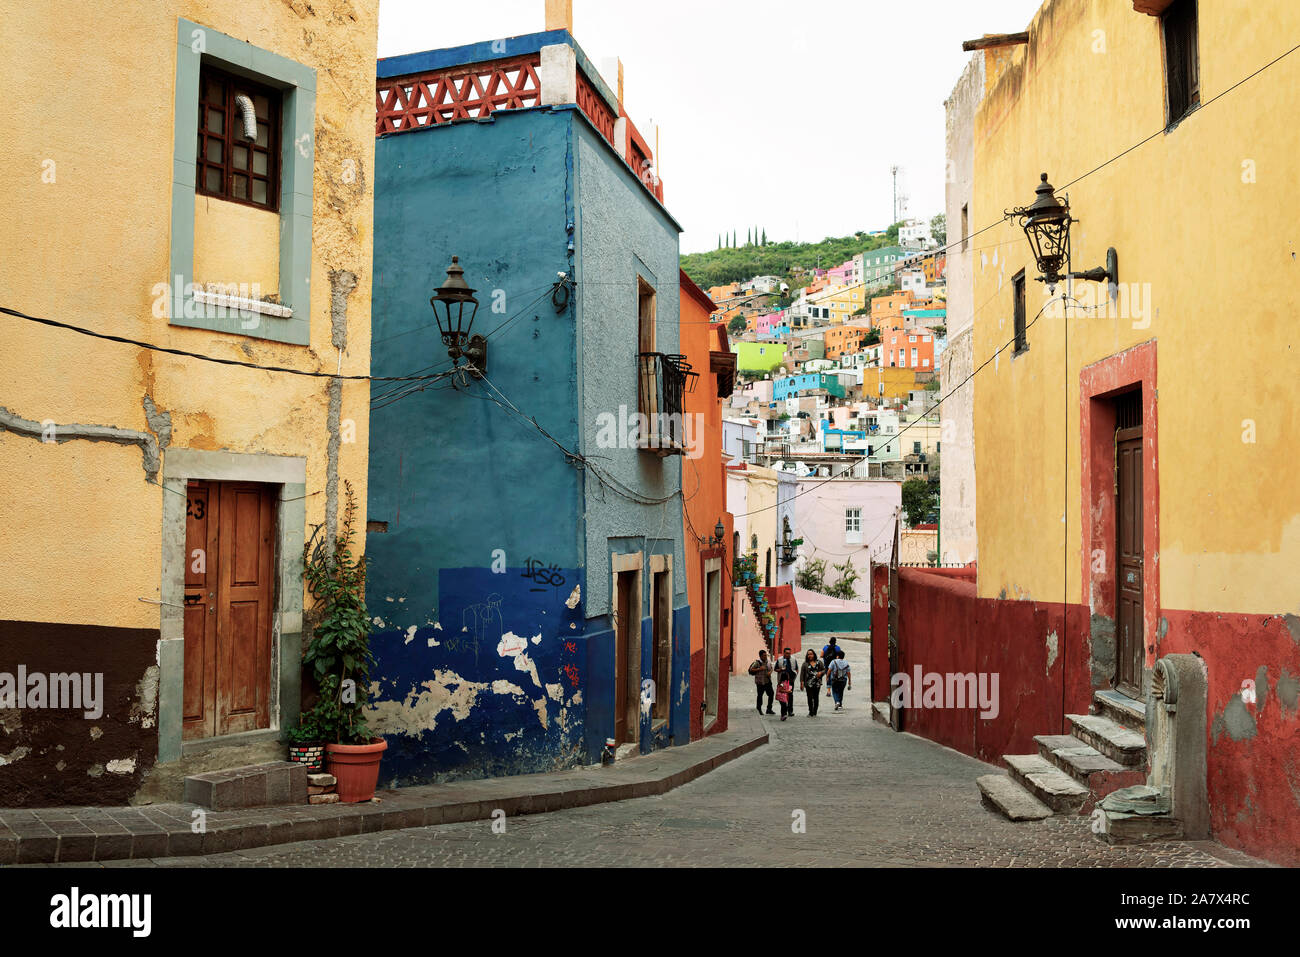 Beautiful street view of colourful houses on Roque Street, in the historic centre of Guanajuato city, Mexico. Jun 2019 Stock Photo